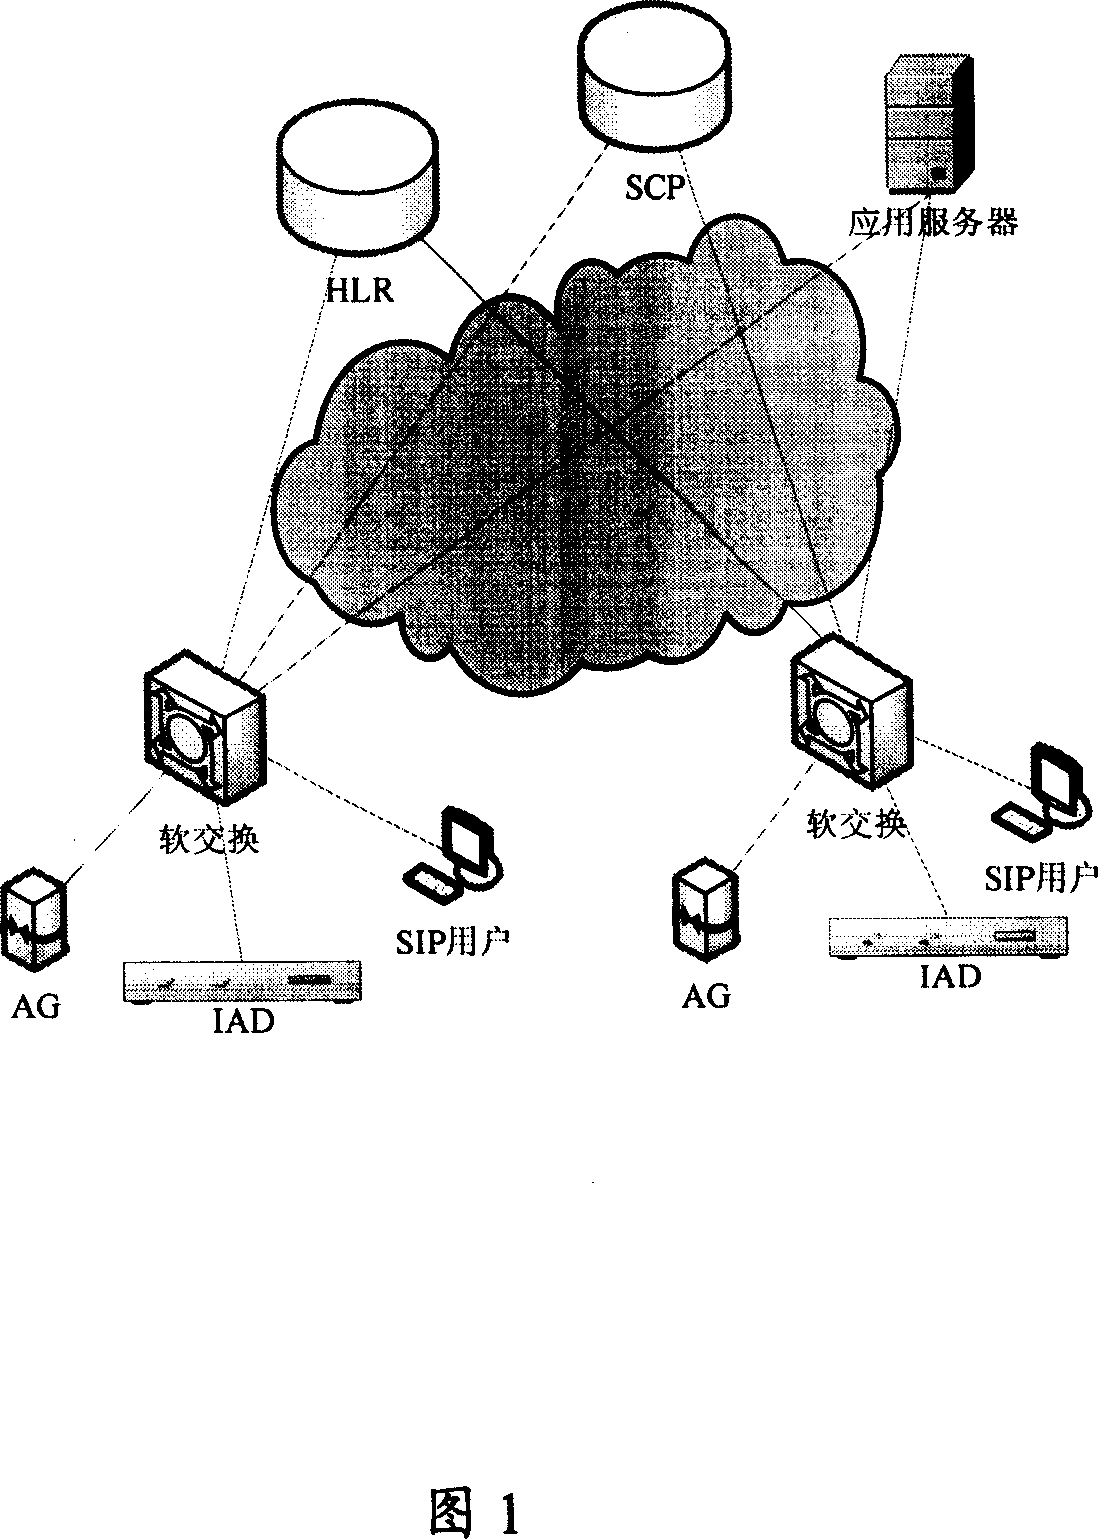 System and method for realizing wide-area centrex